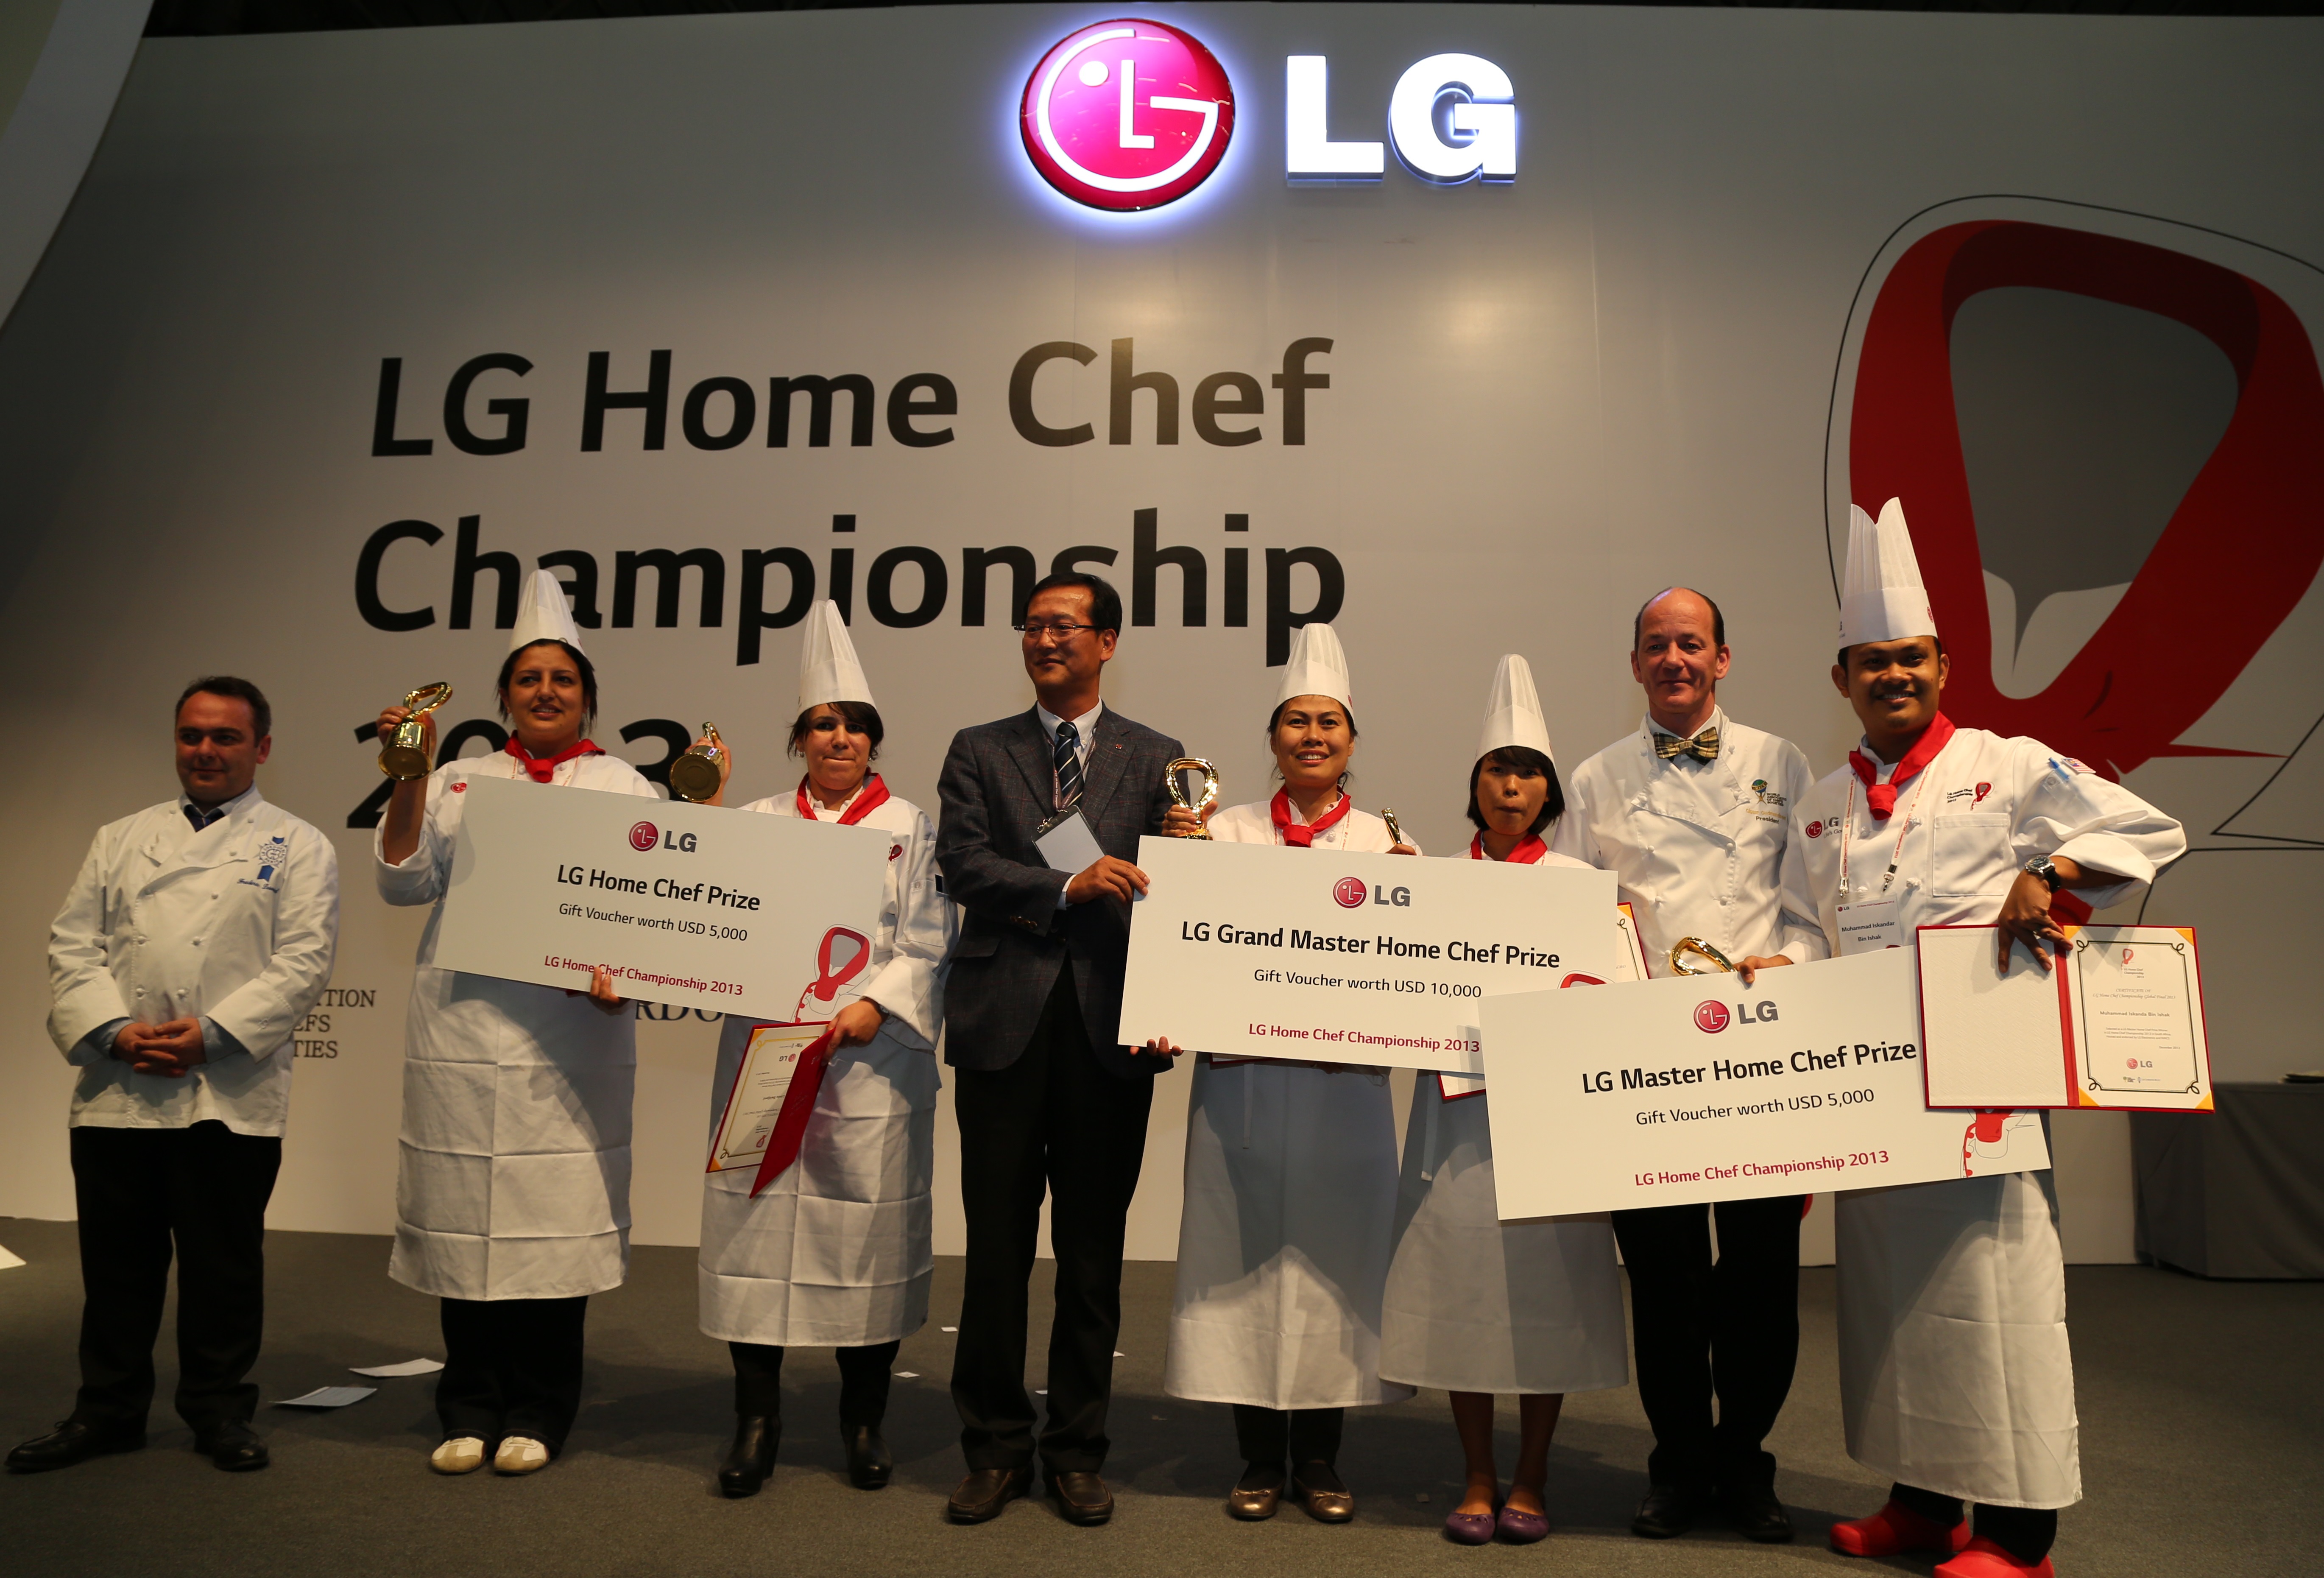 An LG representative awards the winners of the LG Home Chef Championship 2013 on the main stage with certificates and prizes.